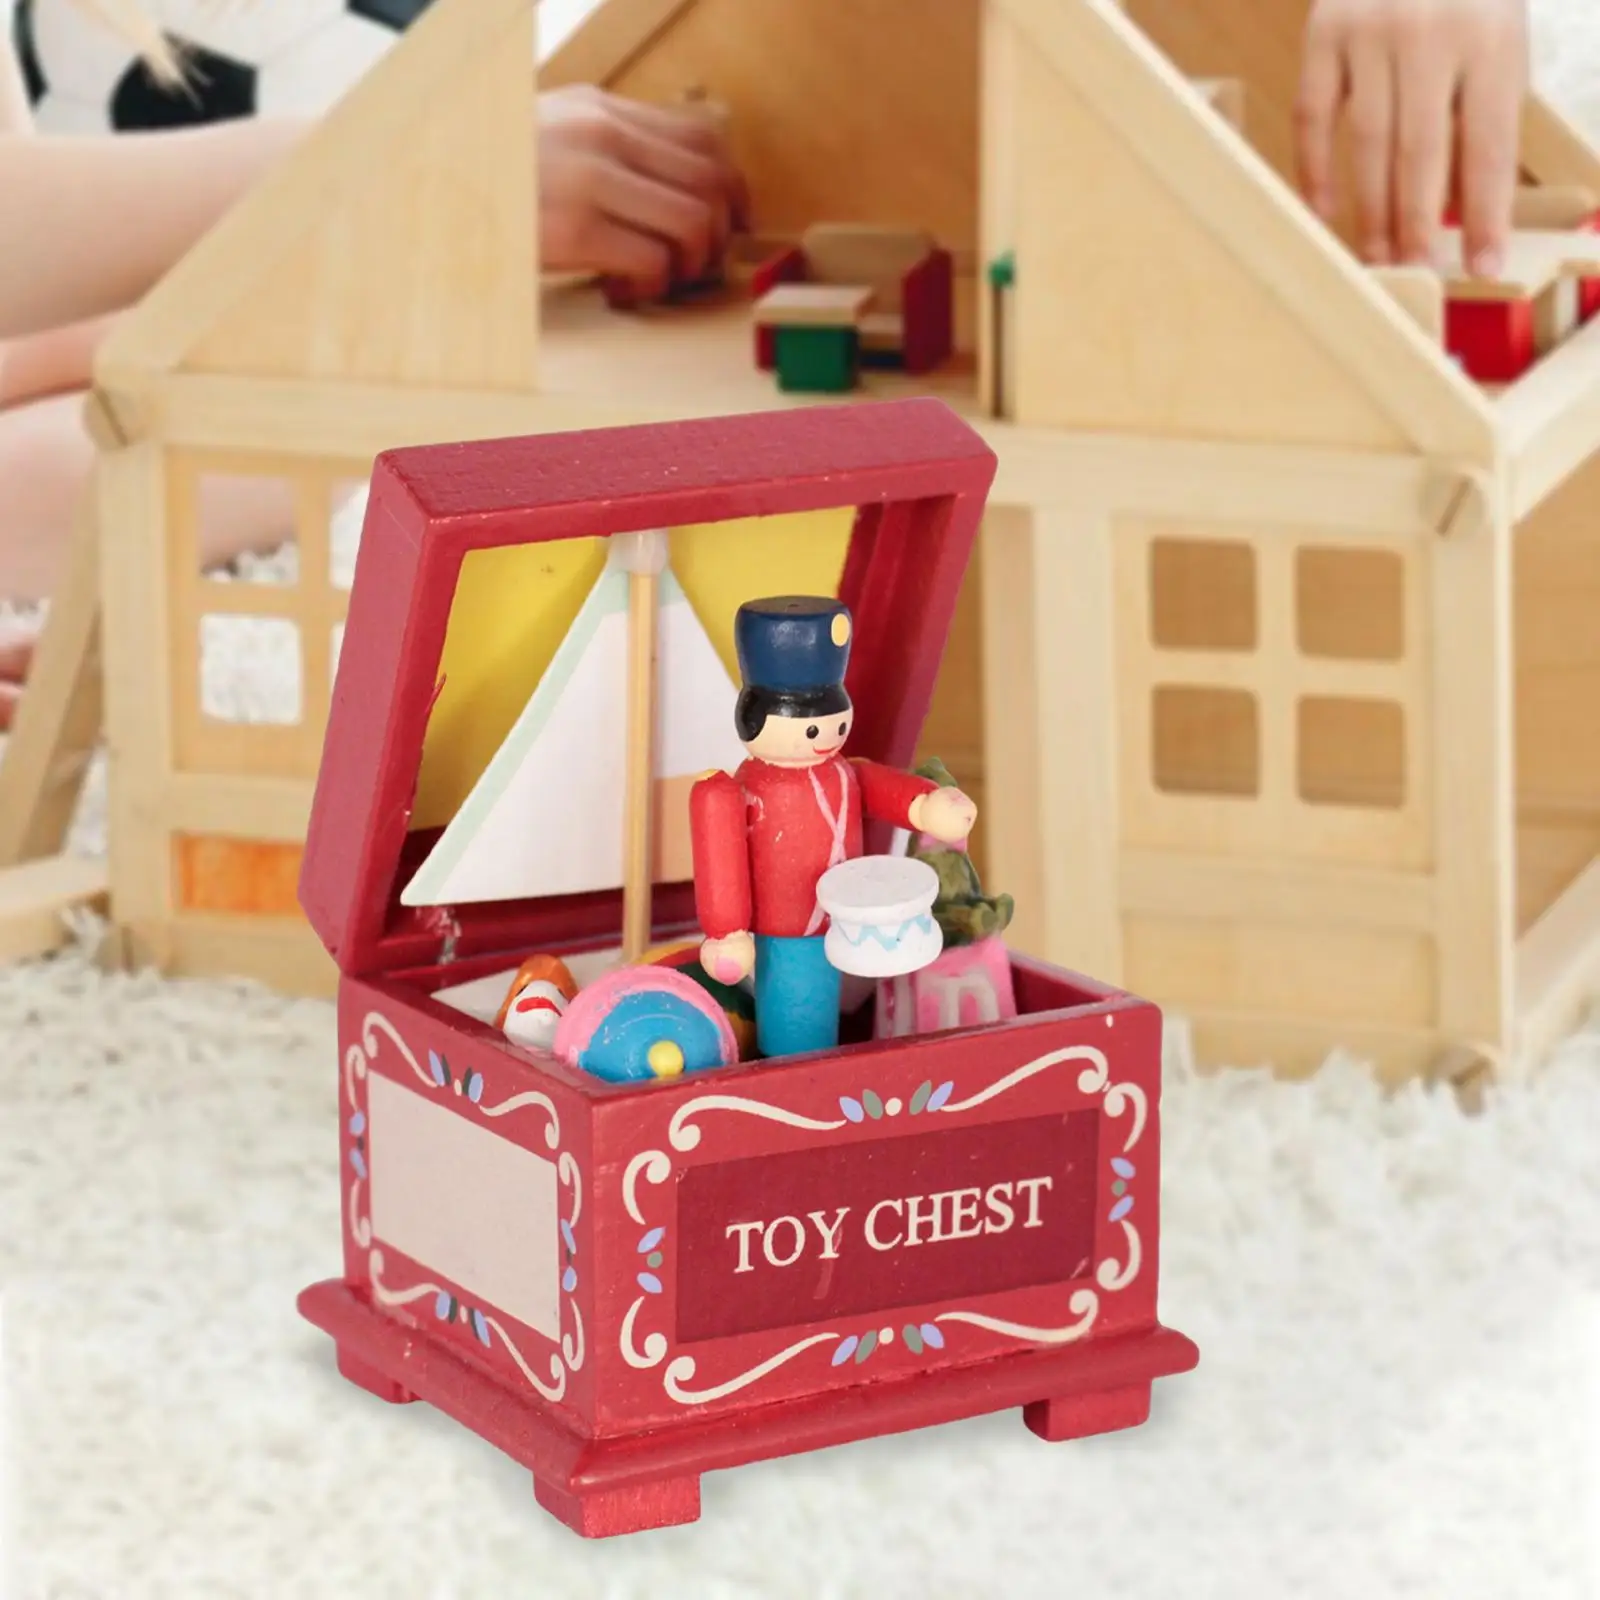 Dollhouse Toys Chest Full of Toys Decoration Ornaments Craft Project for Dollhouse Fairy Garden Playhouse DIY Projects Bedroom